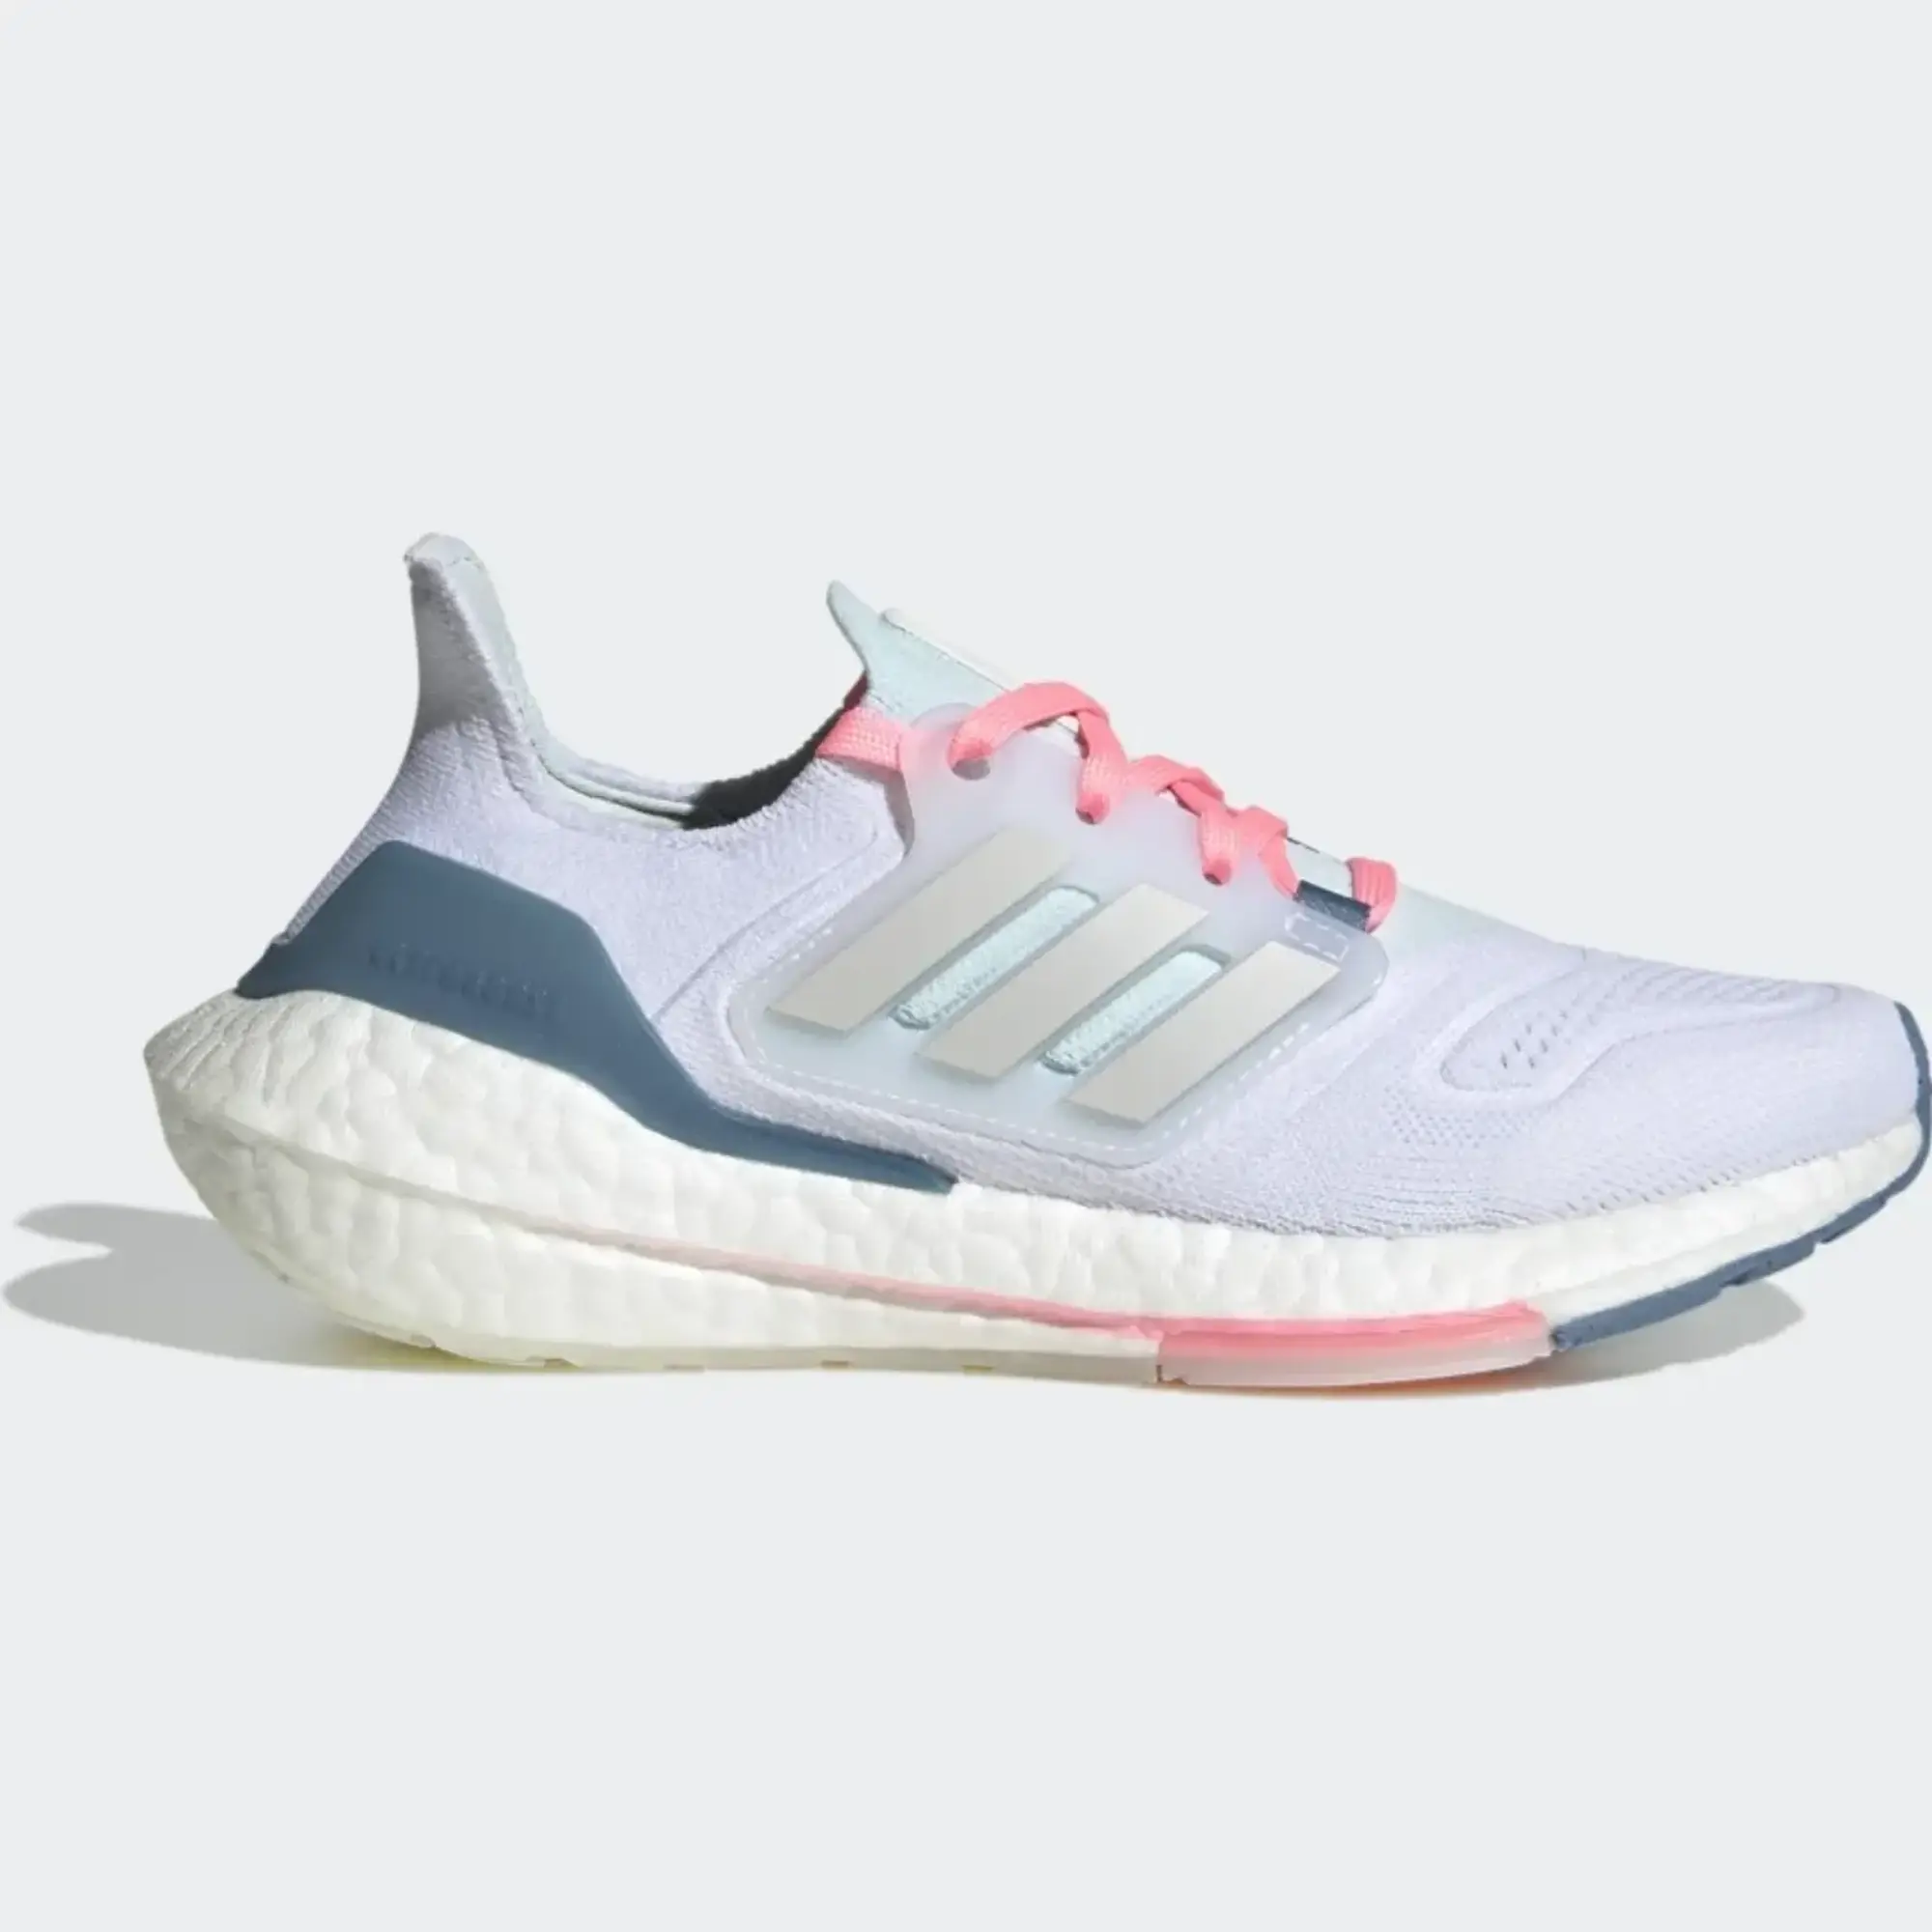 adidas Ultraboost 22 Shoes - Cloud White